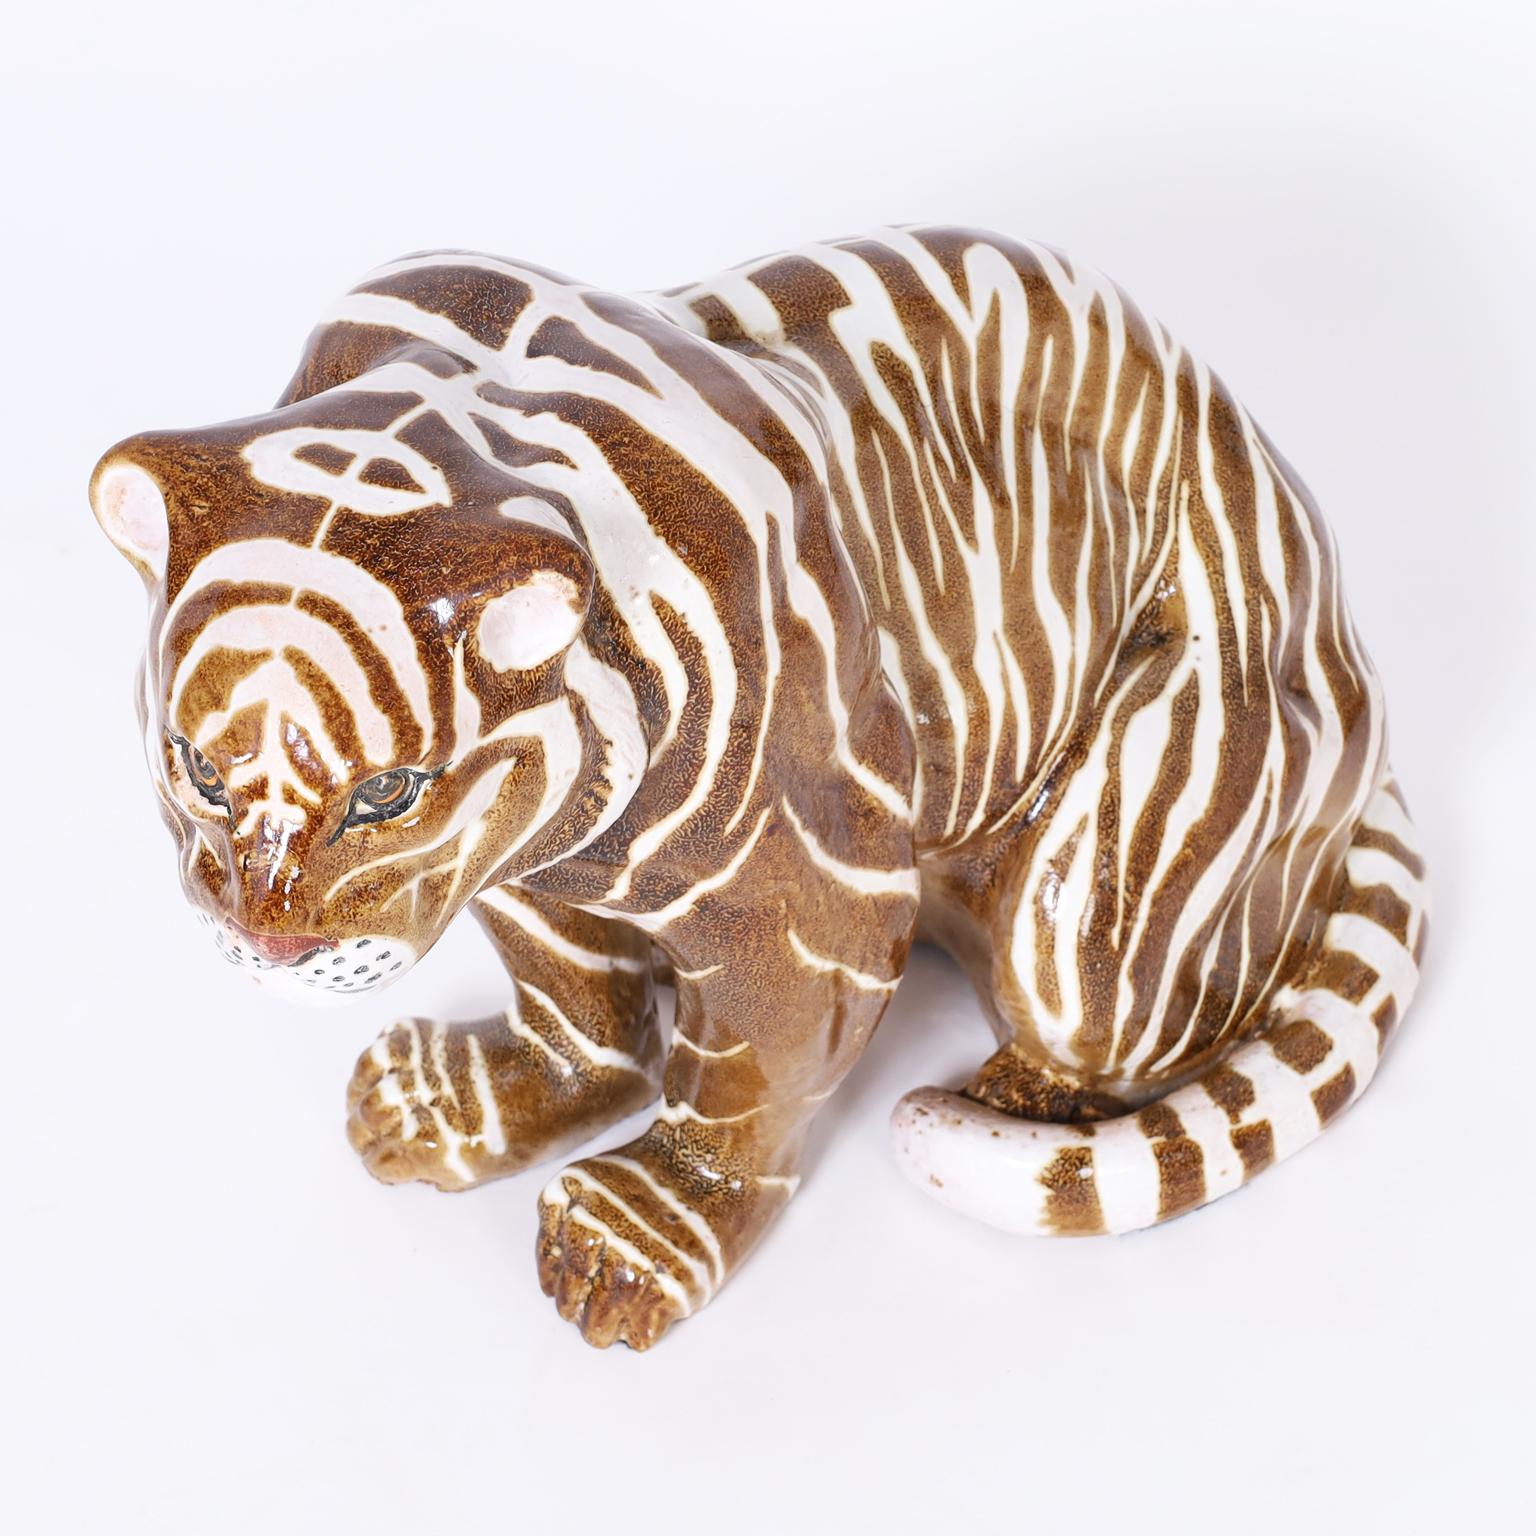 Mid century tiger sculpture or object of art crafted in terra cotta, decorated with brown and white stripes and glazed.